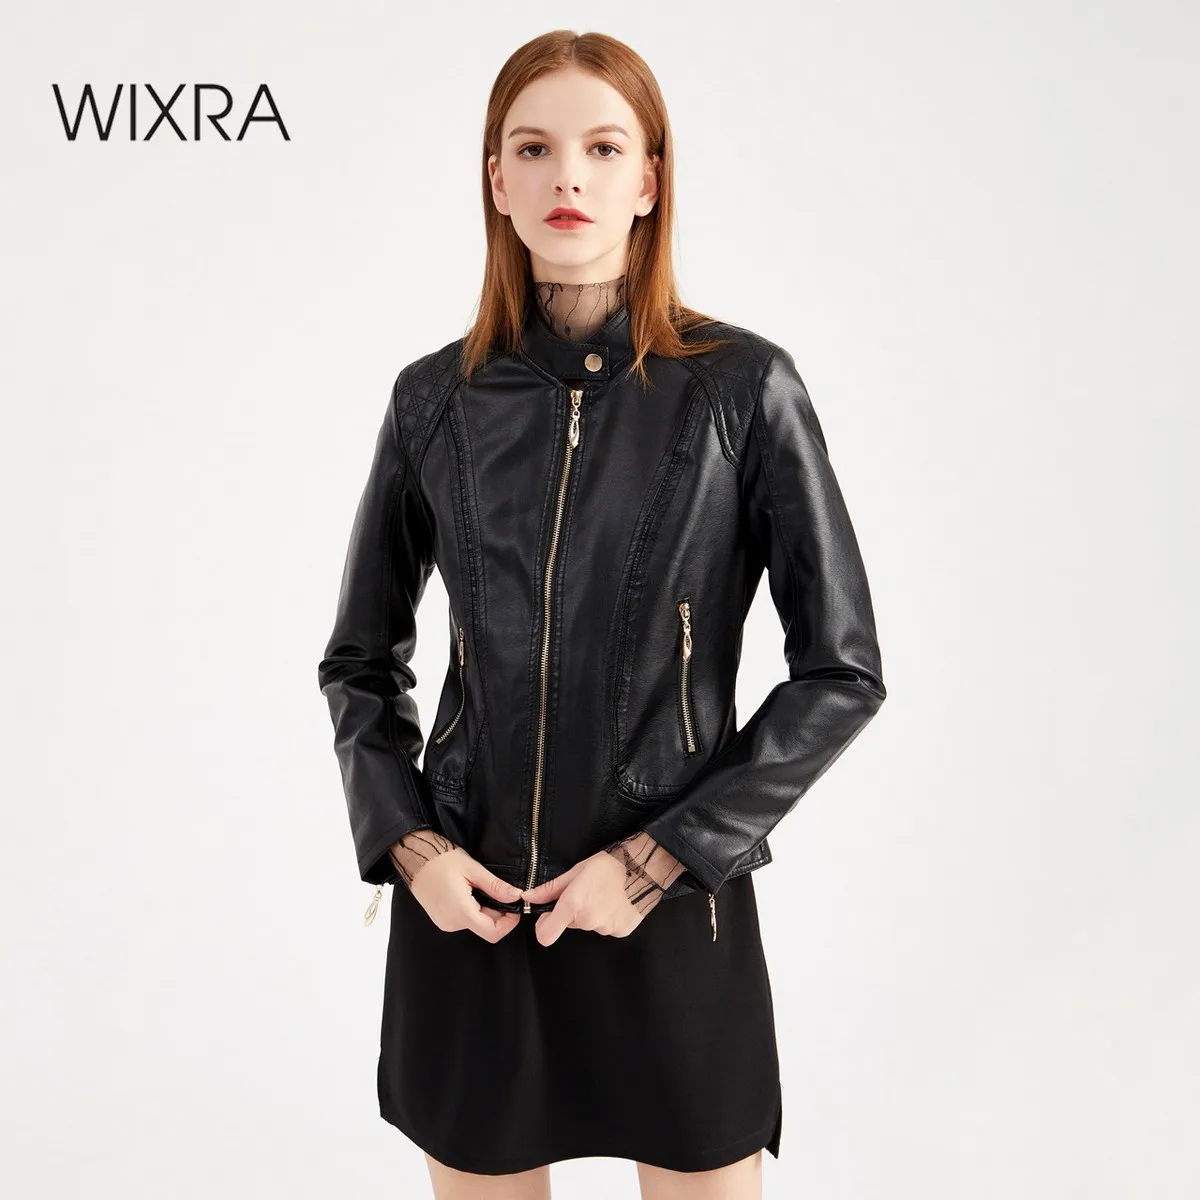 

Wixra Women Faux Leather Jackets Biker BF Style Pockets PU Outerwear Stand Collar Cool Streetwear Spring Autumn